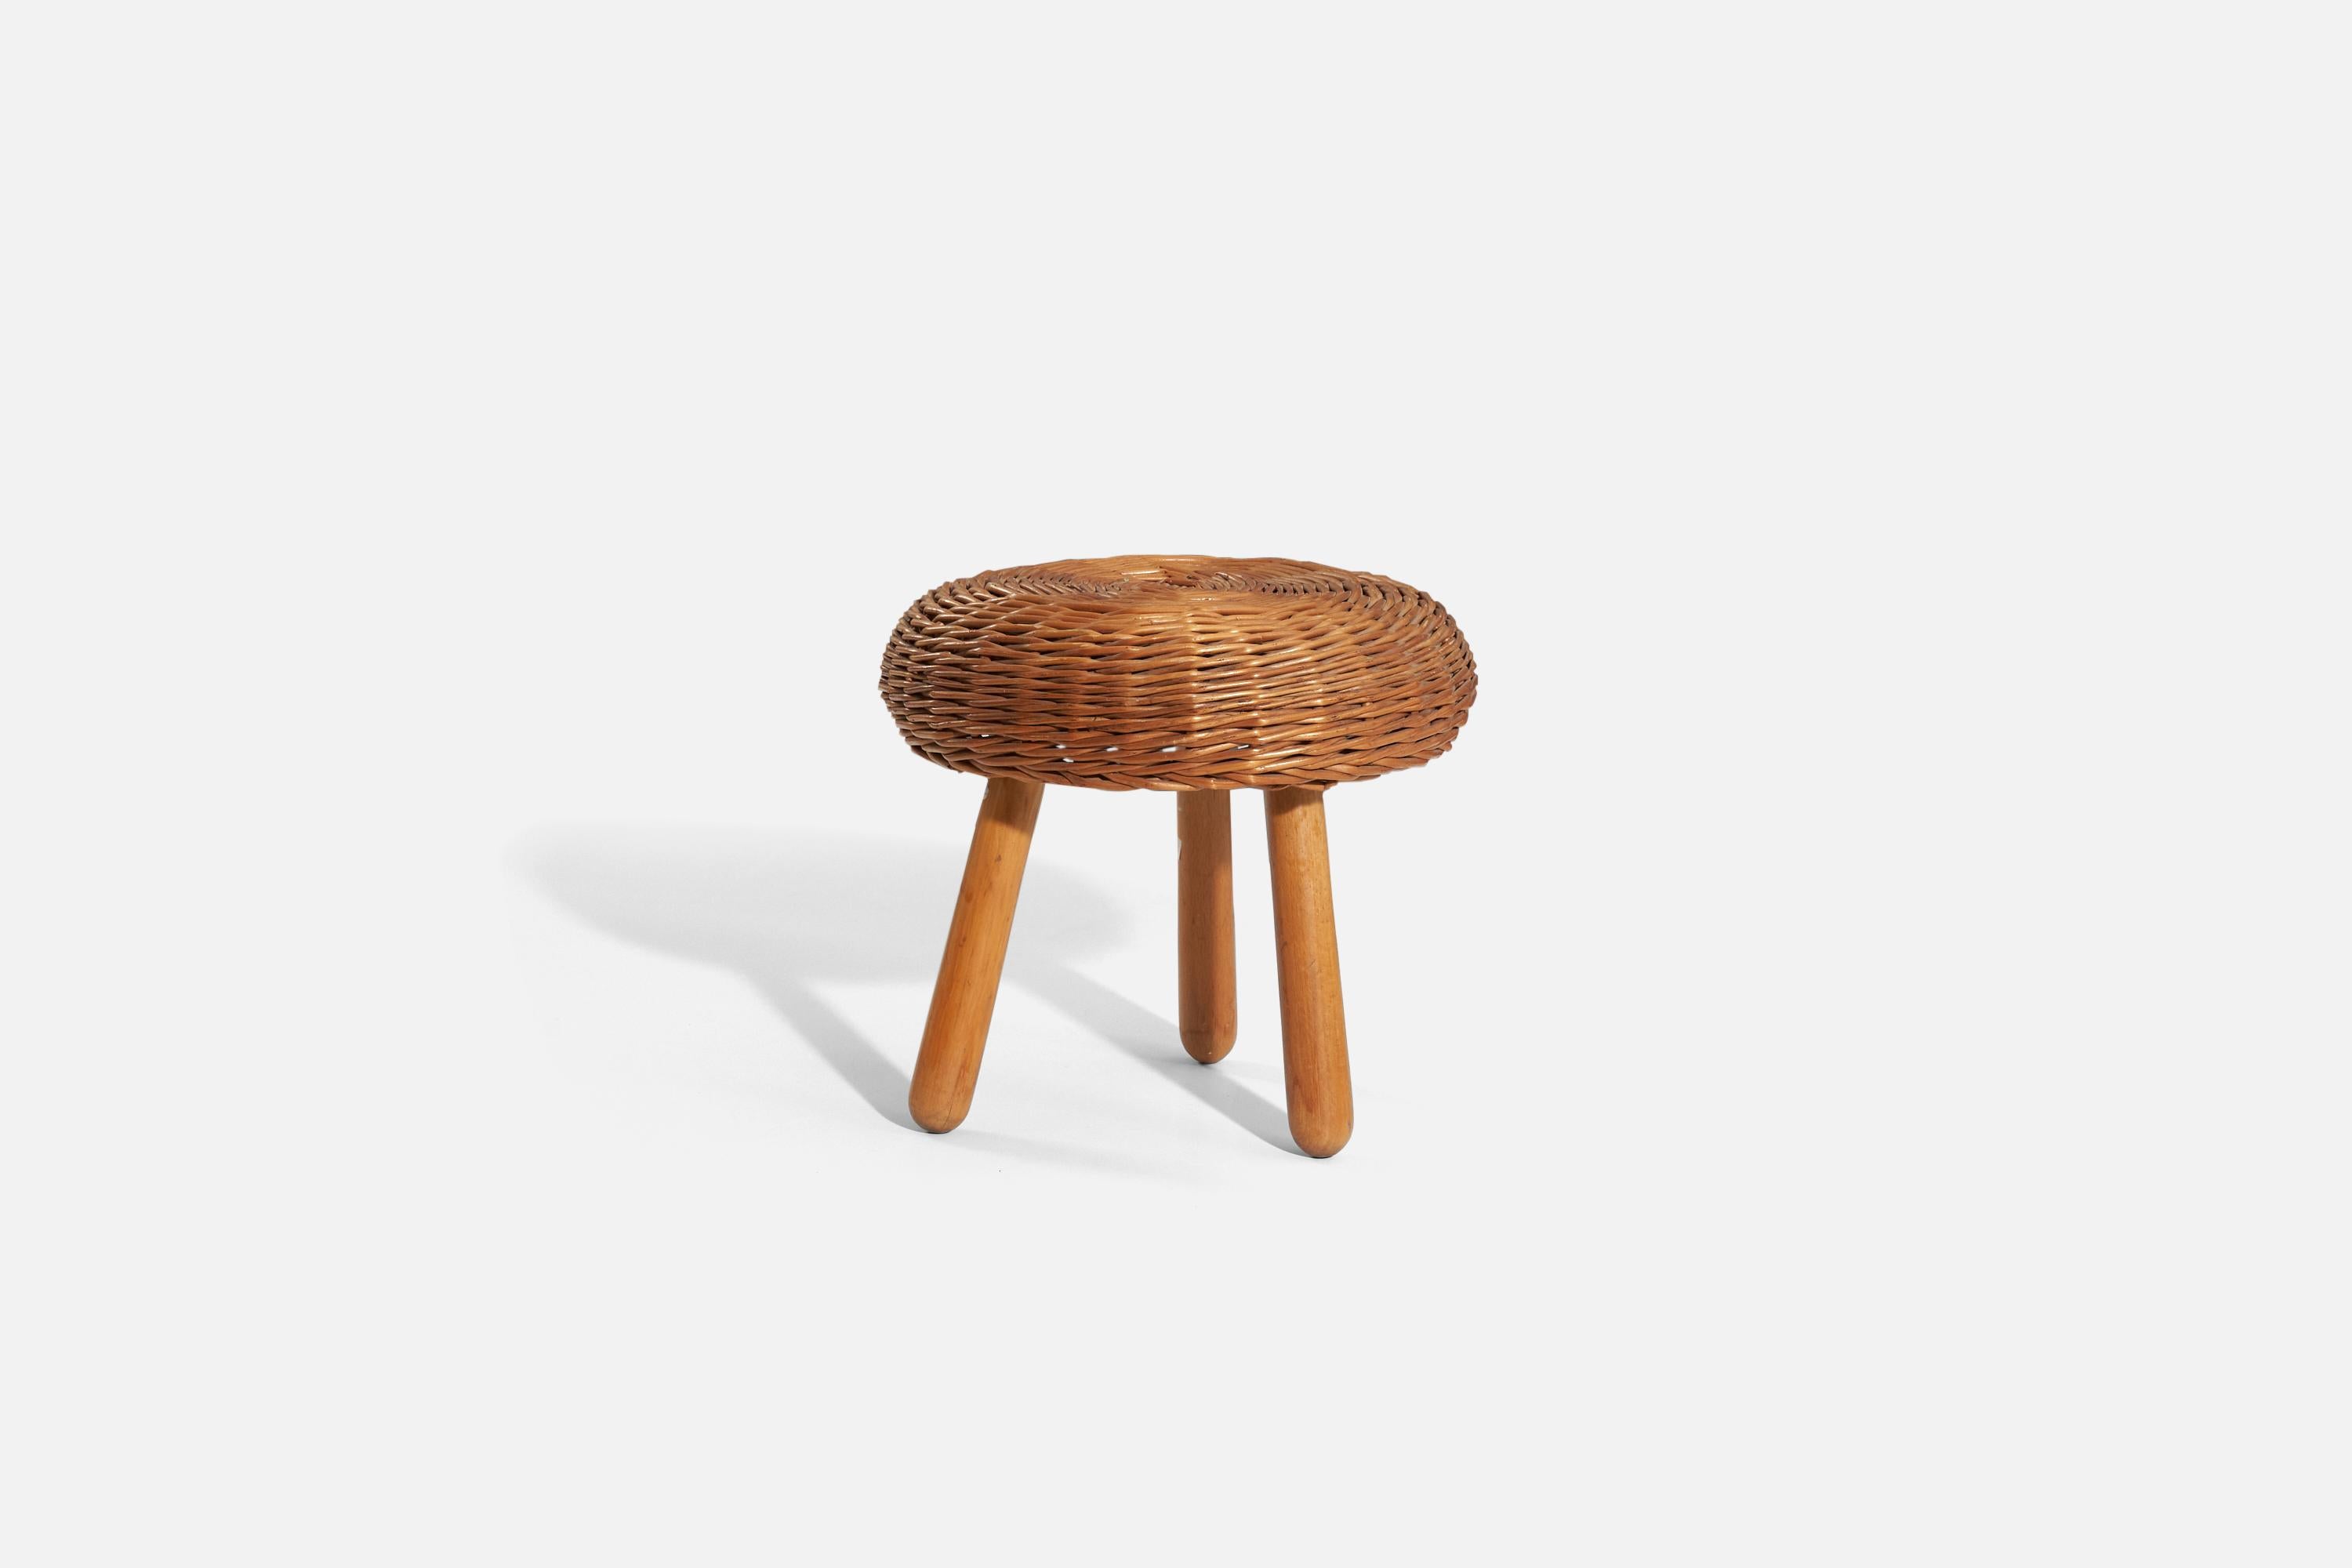 Mid-20th Century Tony Paul 'Attributed' Stool, Wicker, Wood, United States, 1950s For Sale